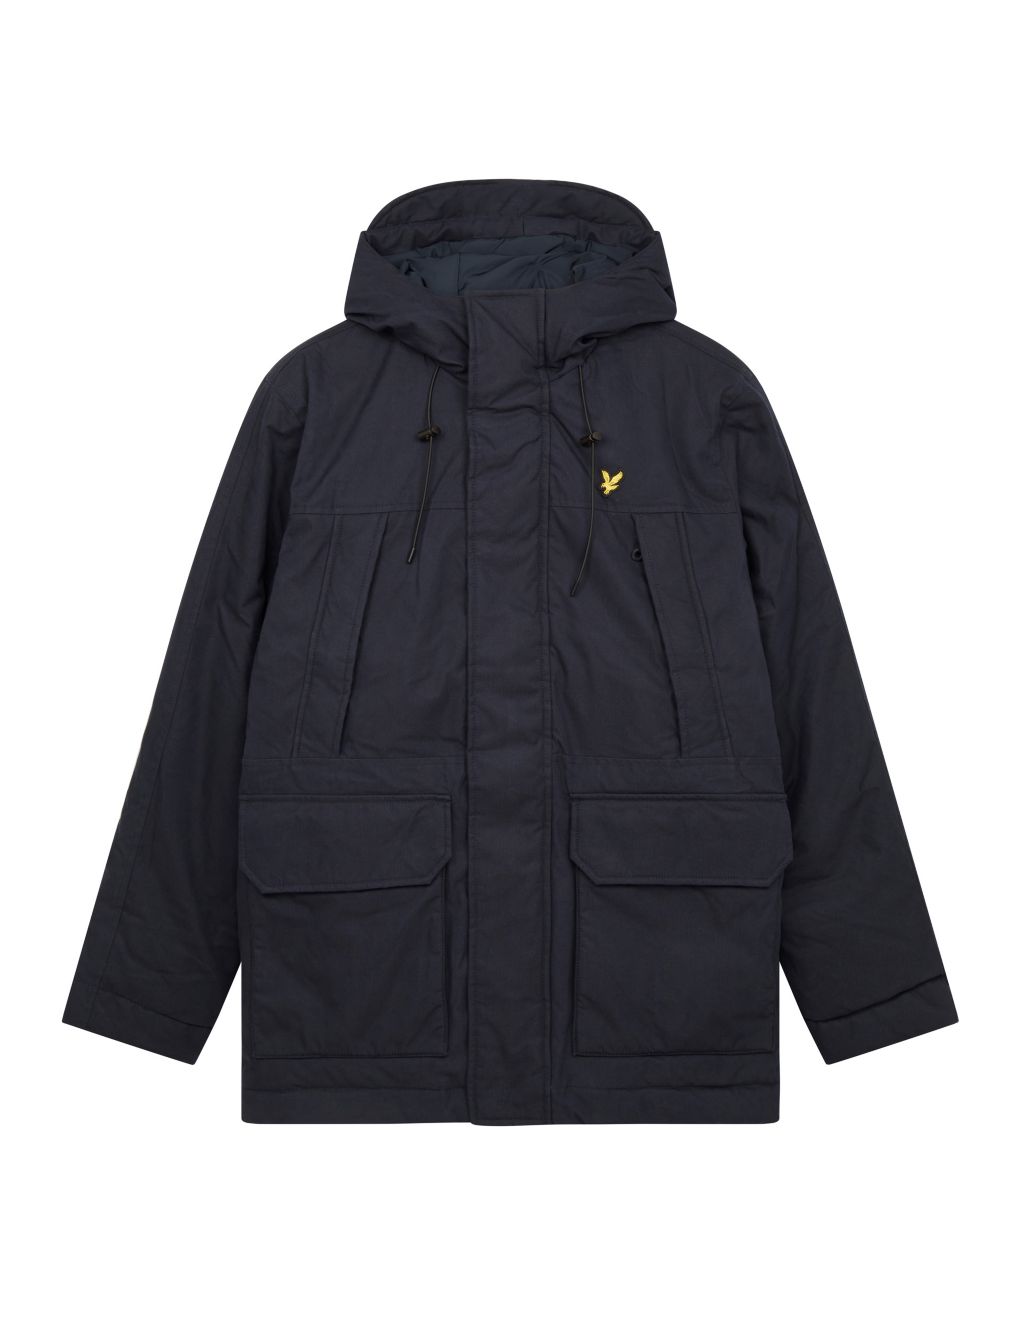 Cotton Rich Hooded Padded Parka Coat image 2